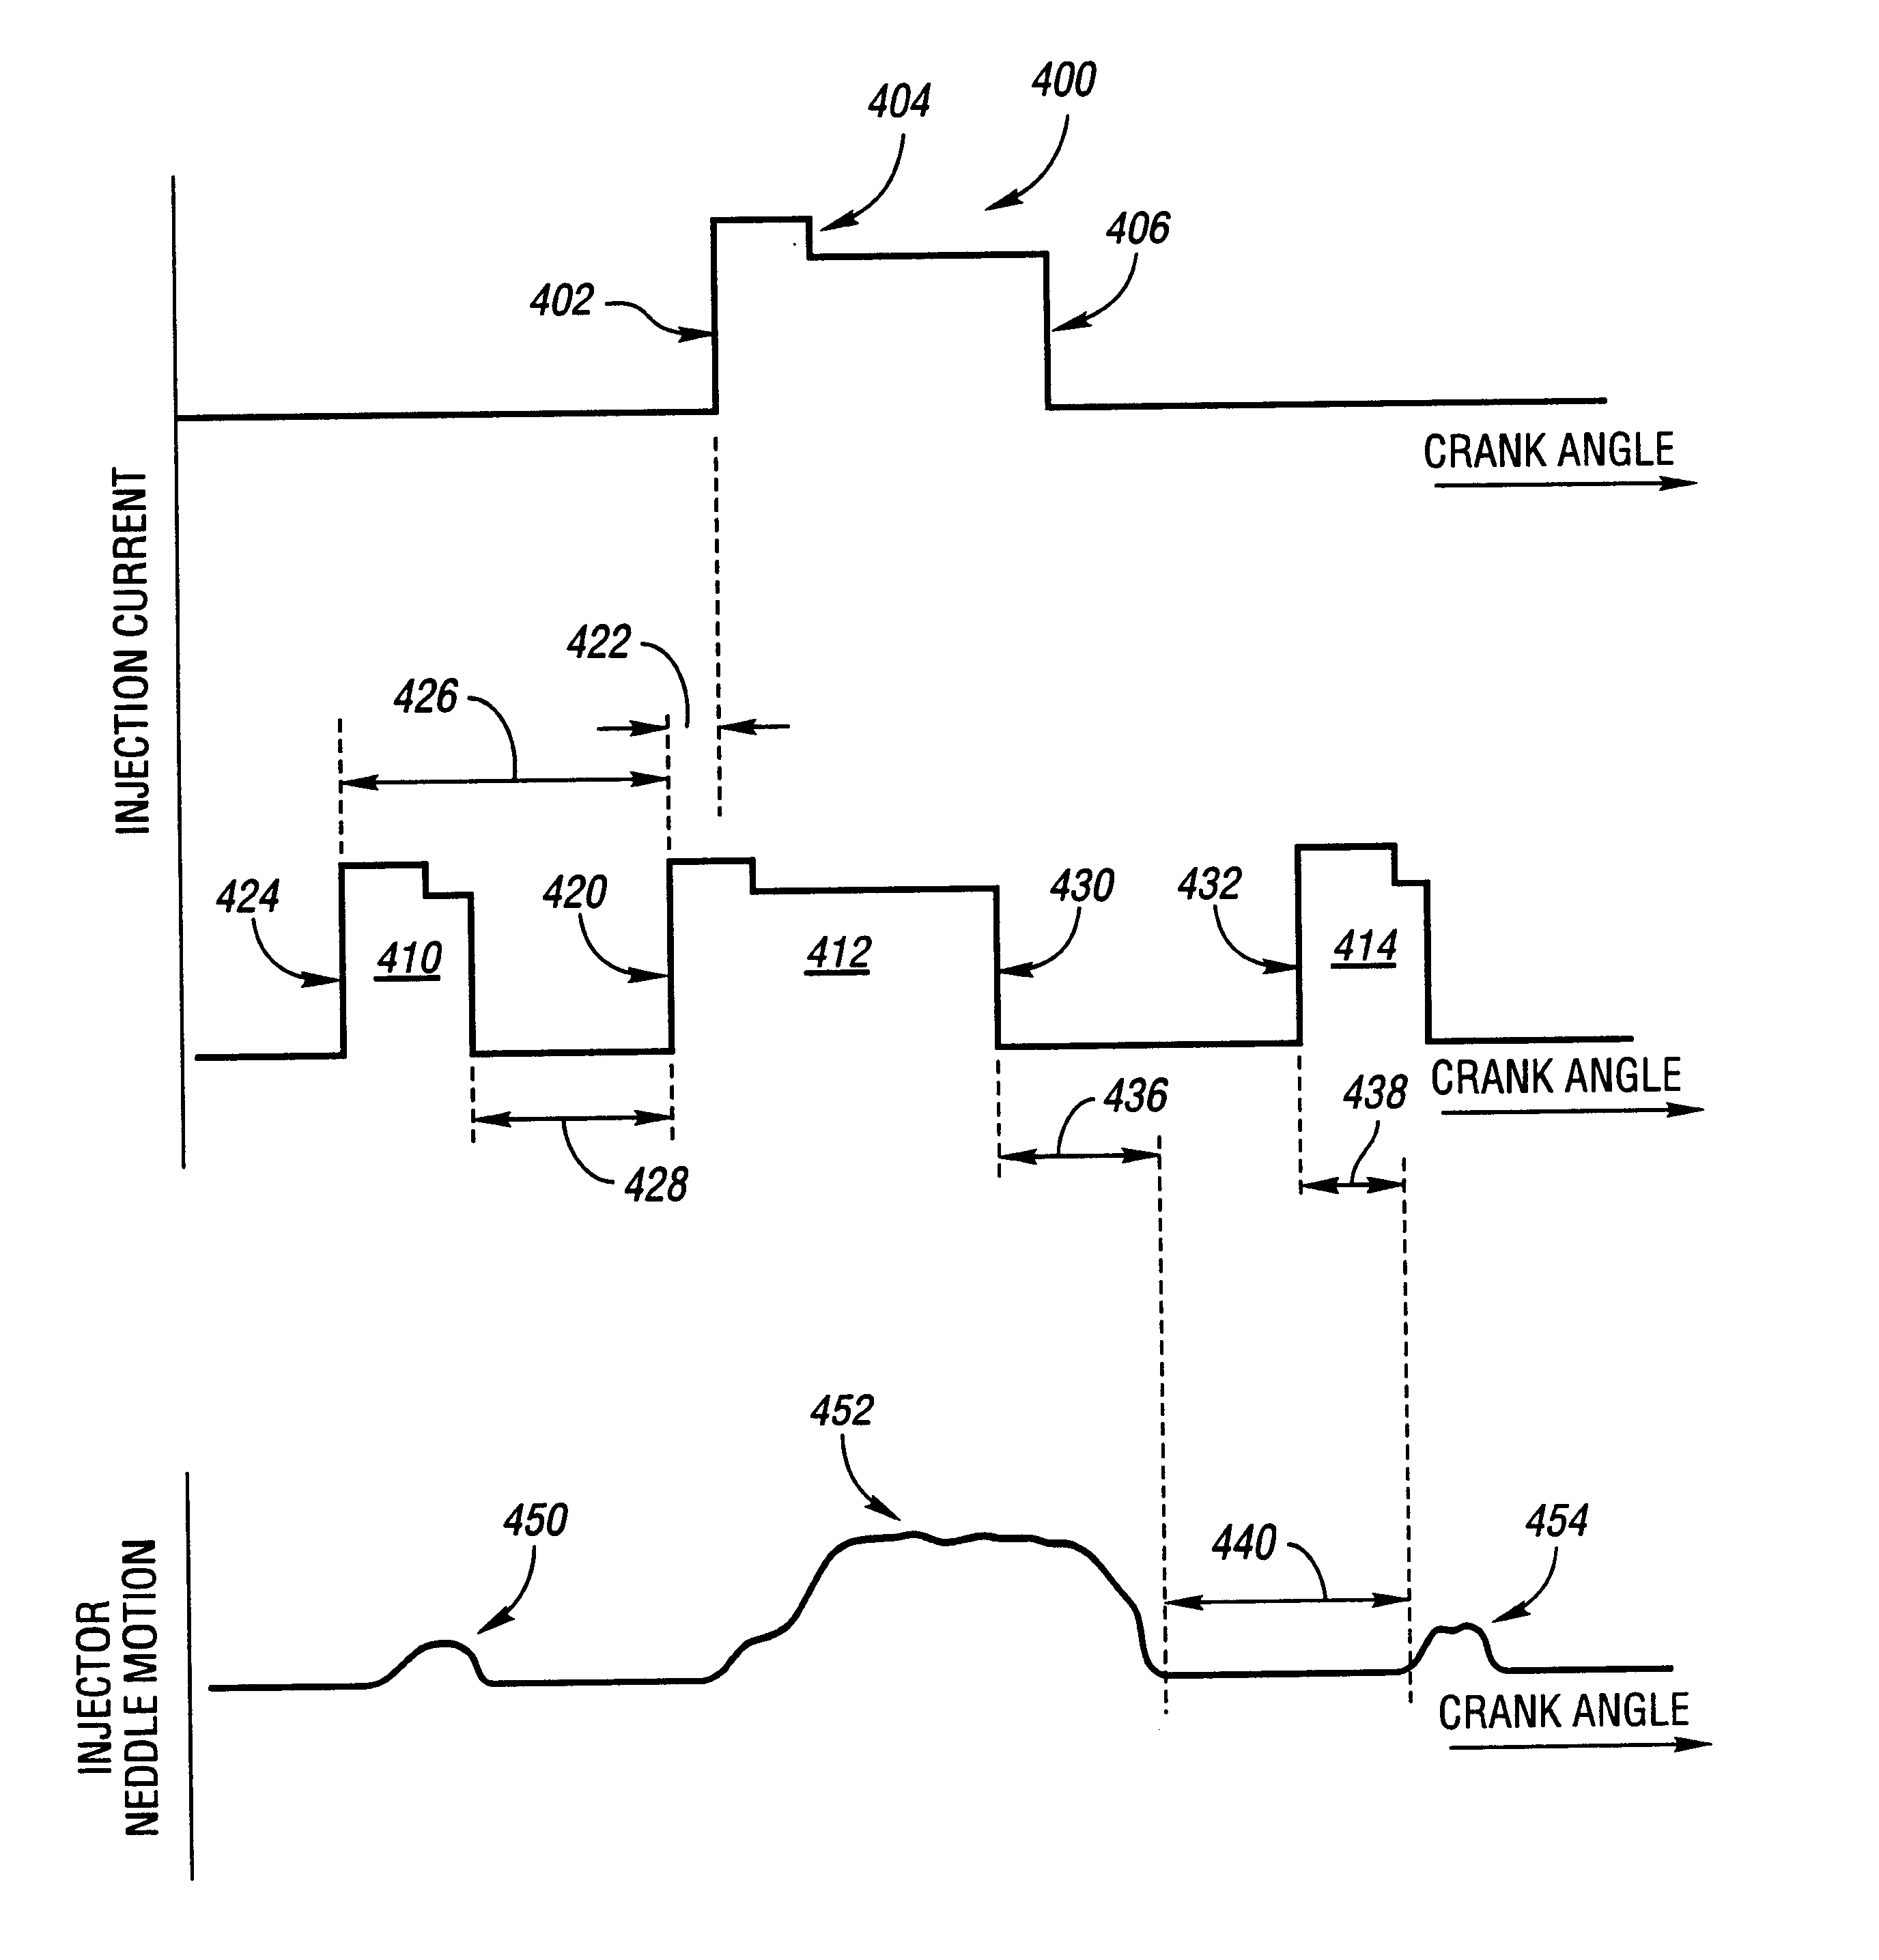 Injection control for a common rail fuel system